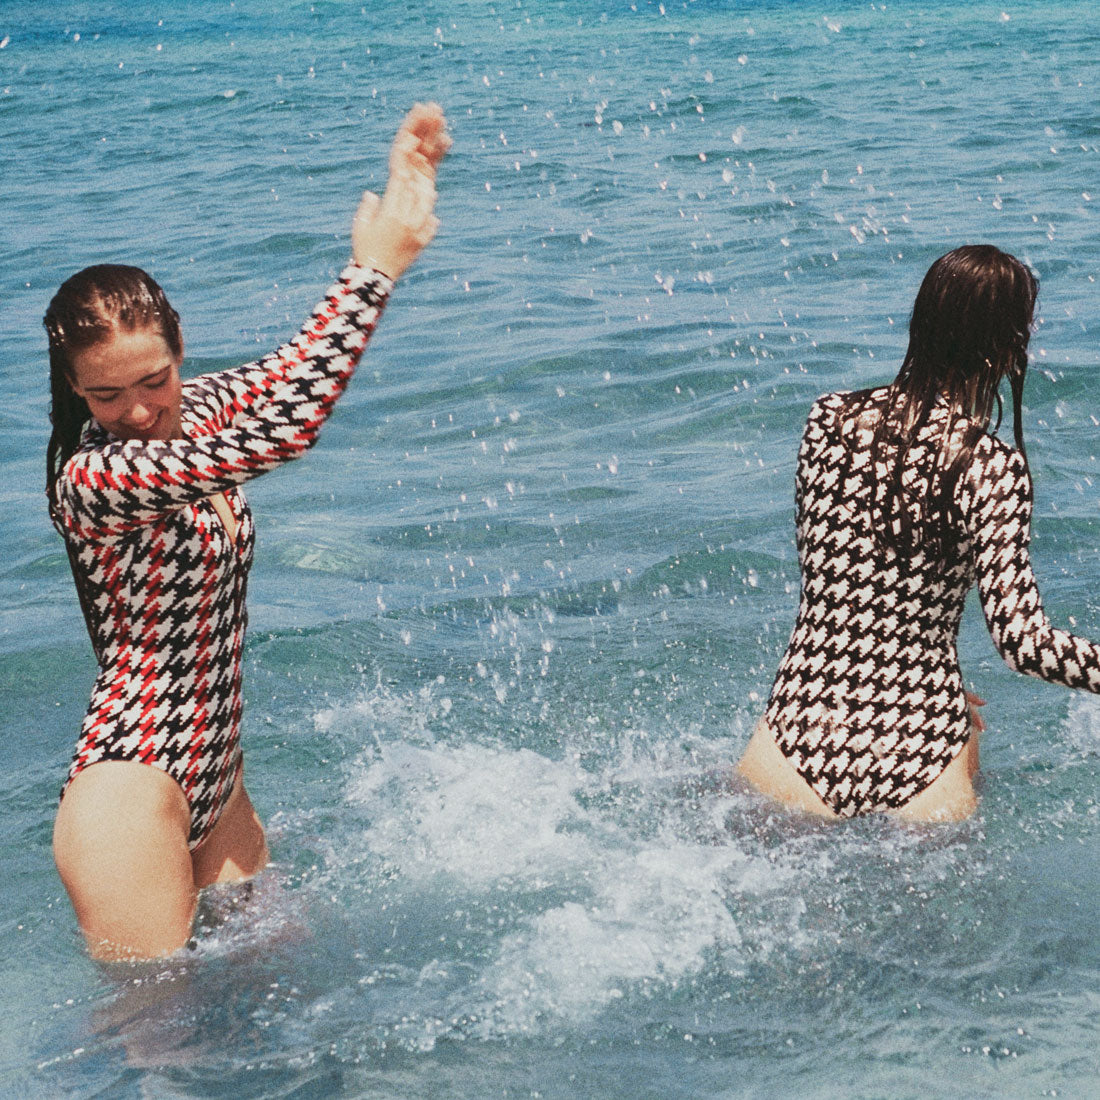 Two girls playing in the sea splashing eachother.